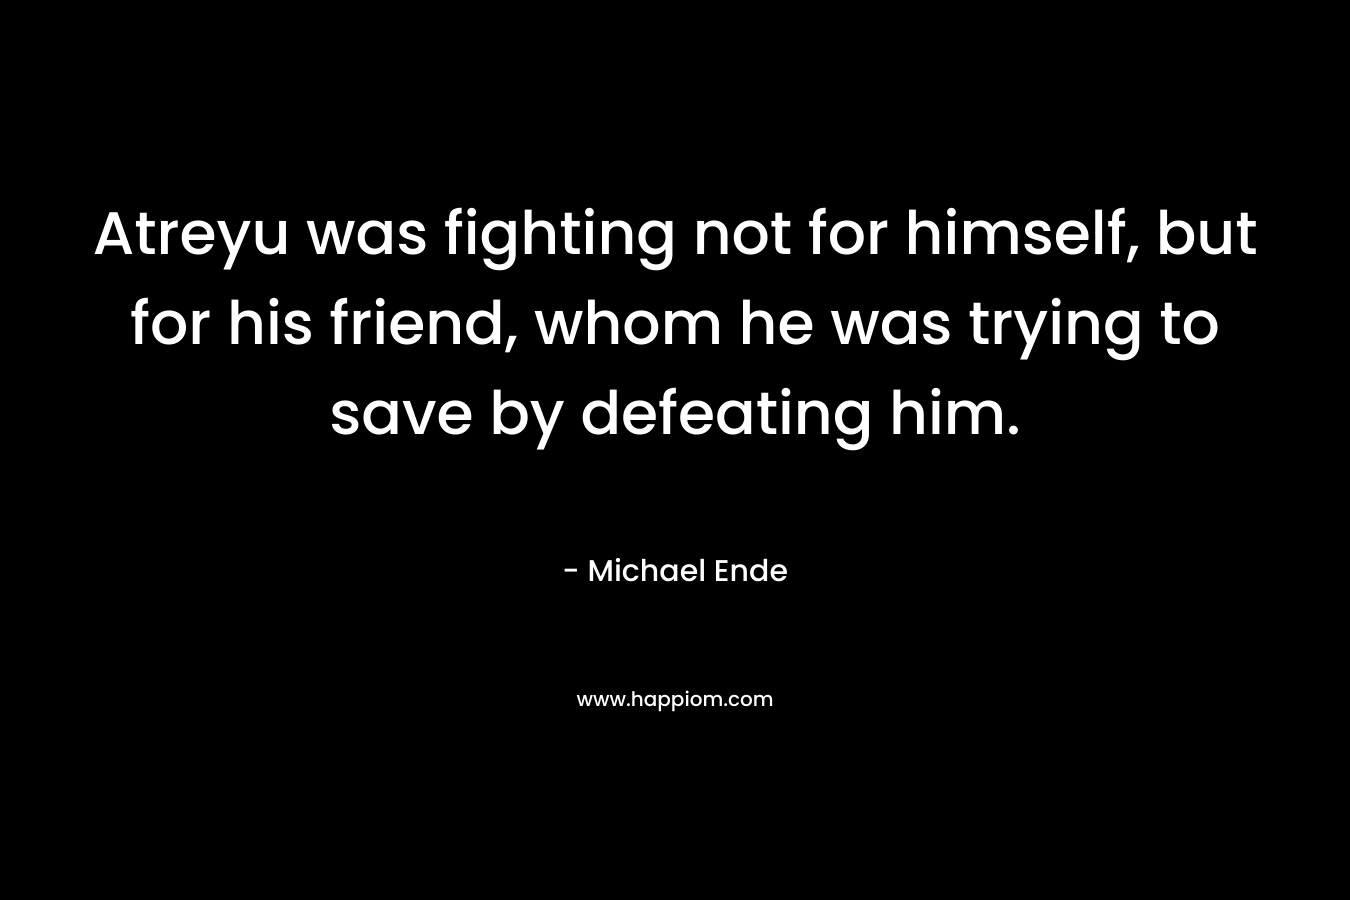 Atreyu was fighting not for himself, but for his friend, whom he was trying to save by defeating him. – Michael Ende